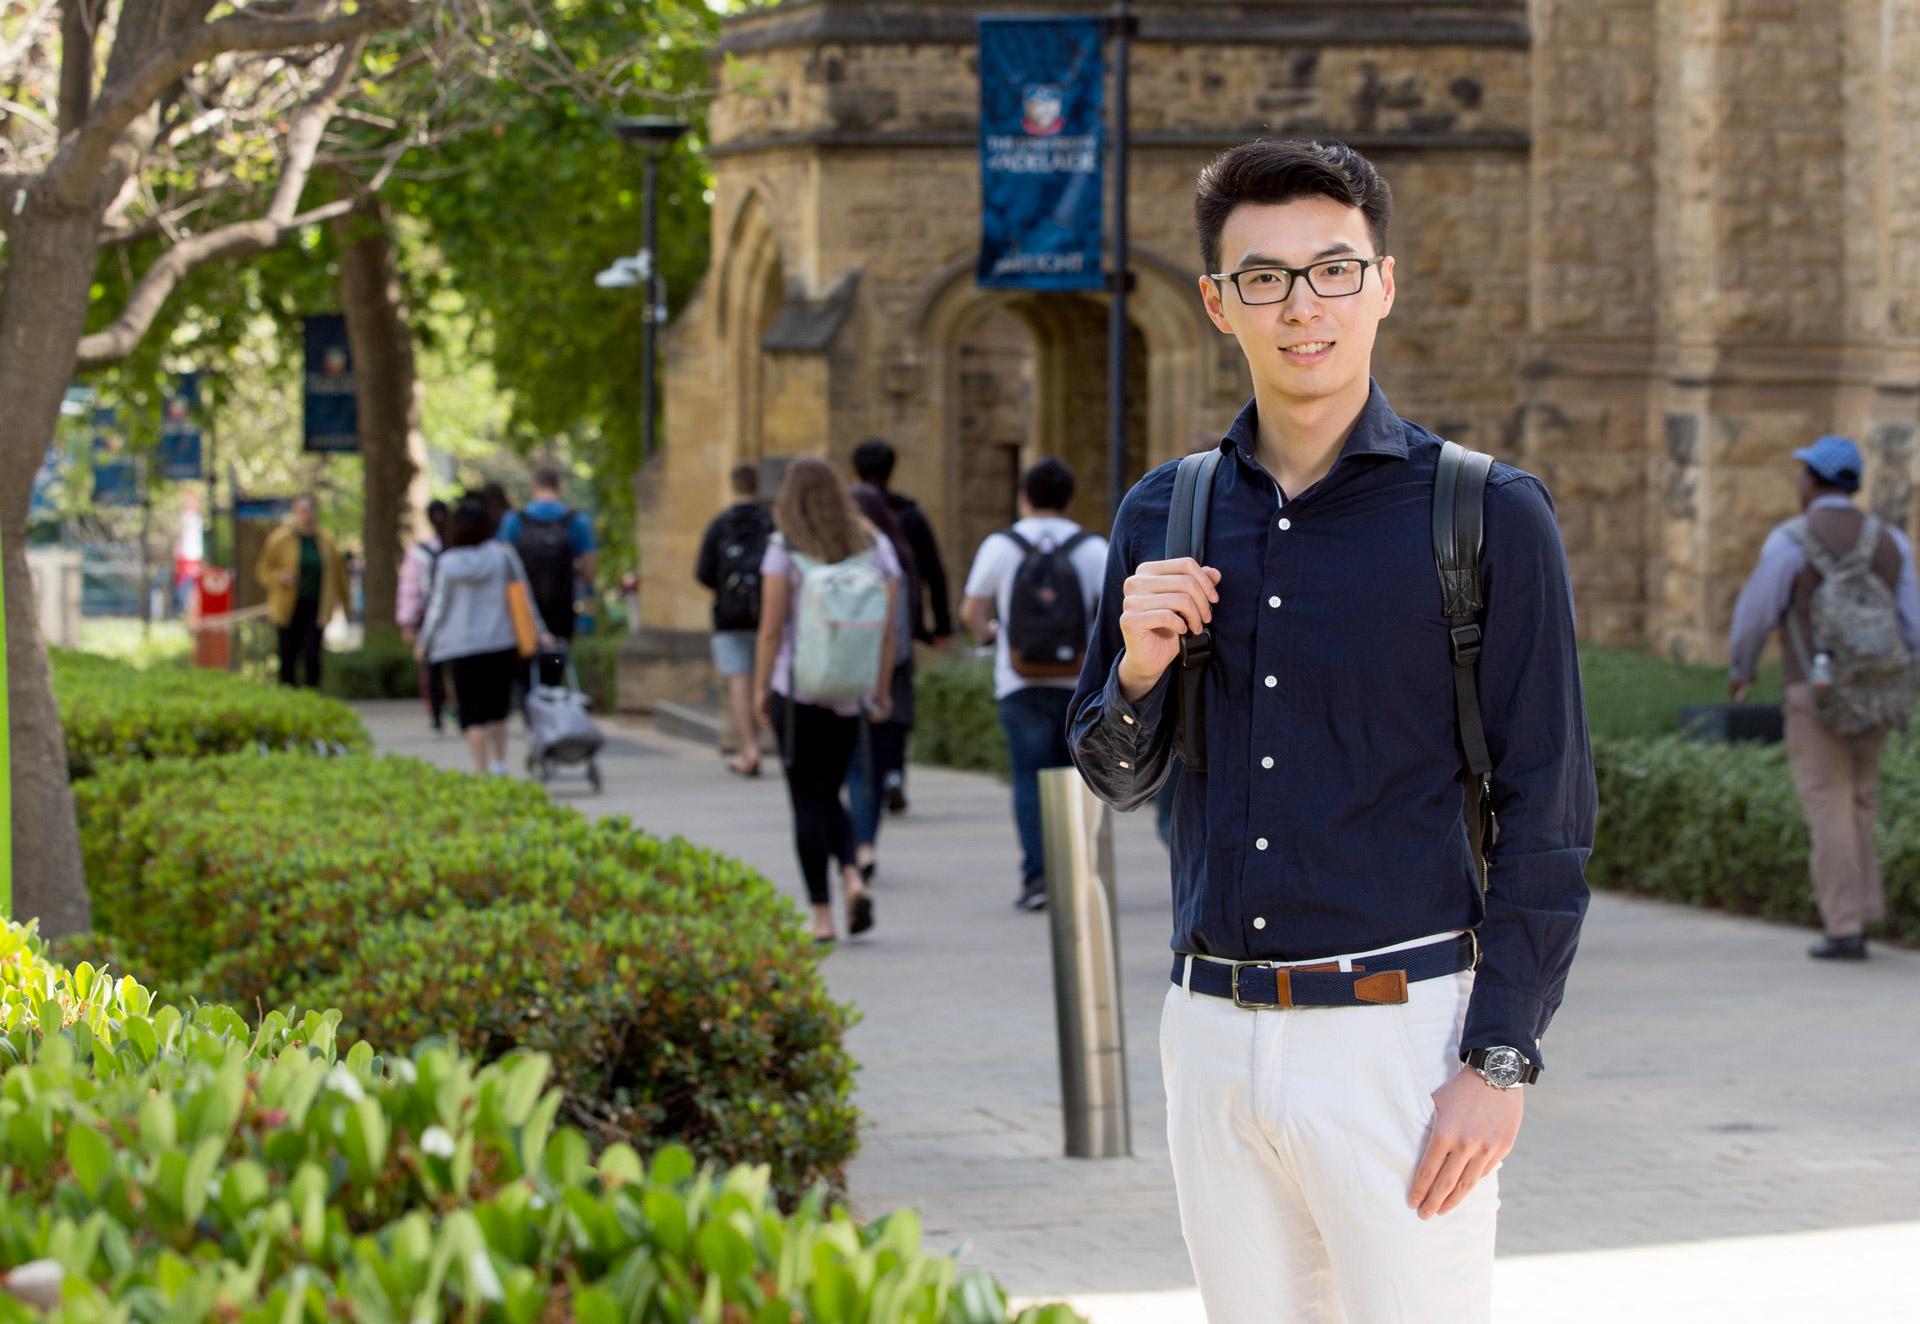 Denghao Wu - Bachelor of Sciences (Biotechnology) | "My biotechnology degree has given me fascinating insights into both biological sciences research and the biotechnology industry, which utilises this scientific research to push the boundaries of innovation and development for the benefit of humankind."